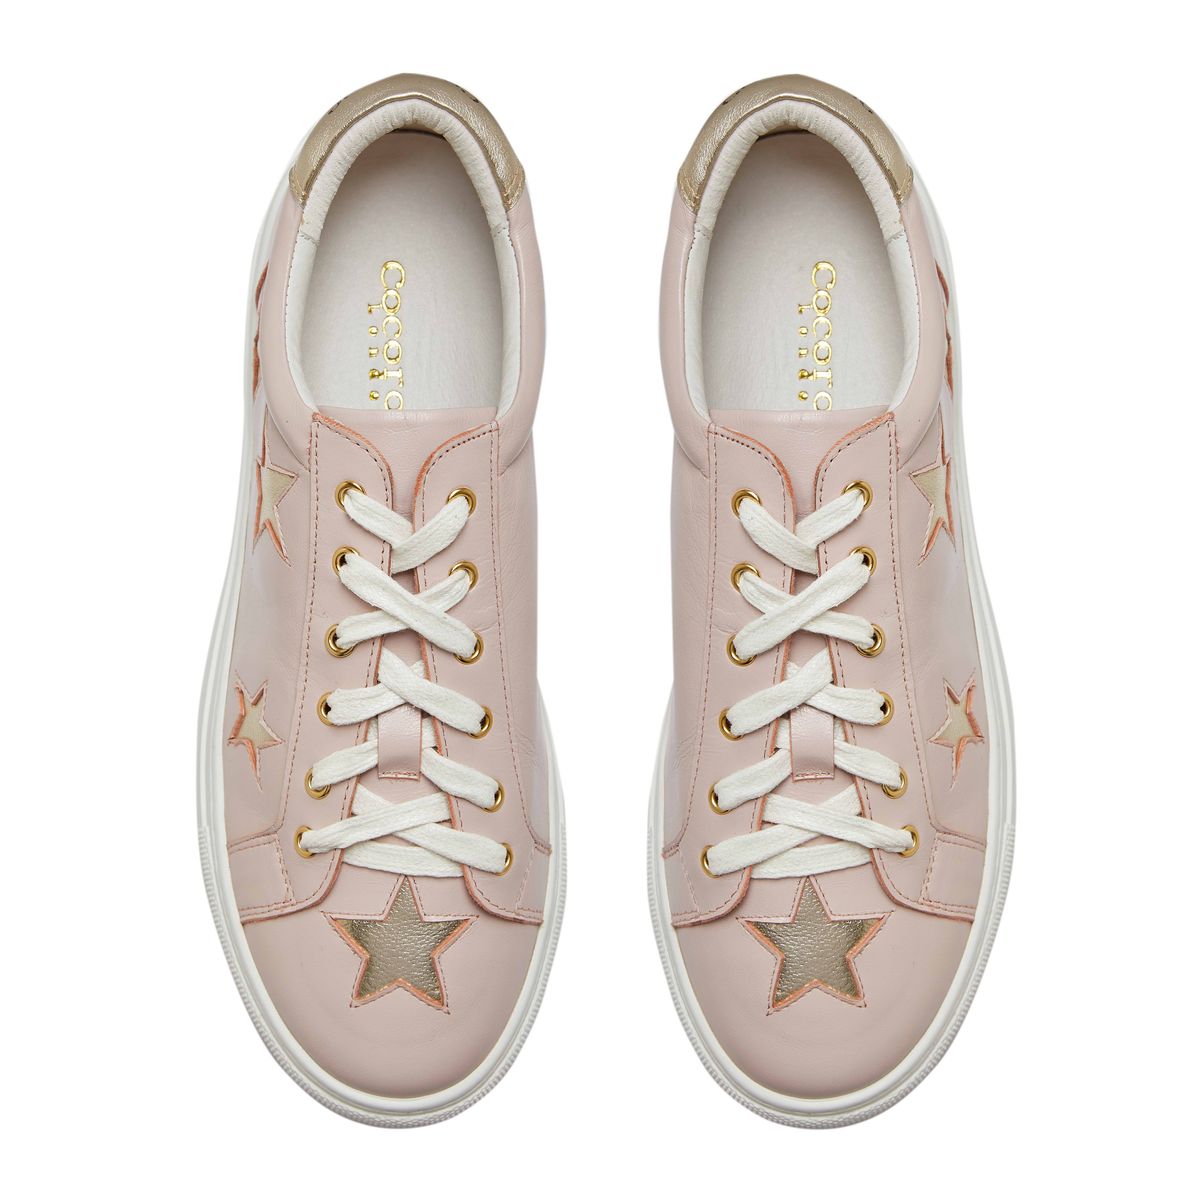 Hoxton Pastel Pink with Gold Stars